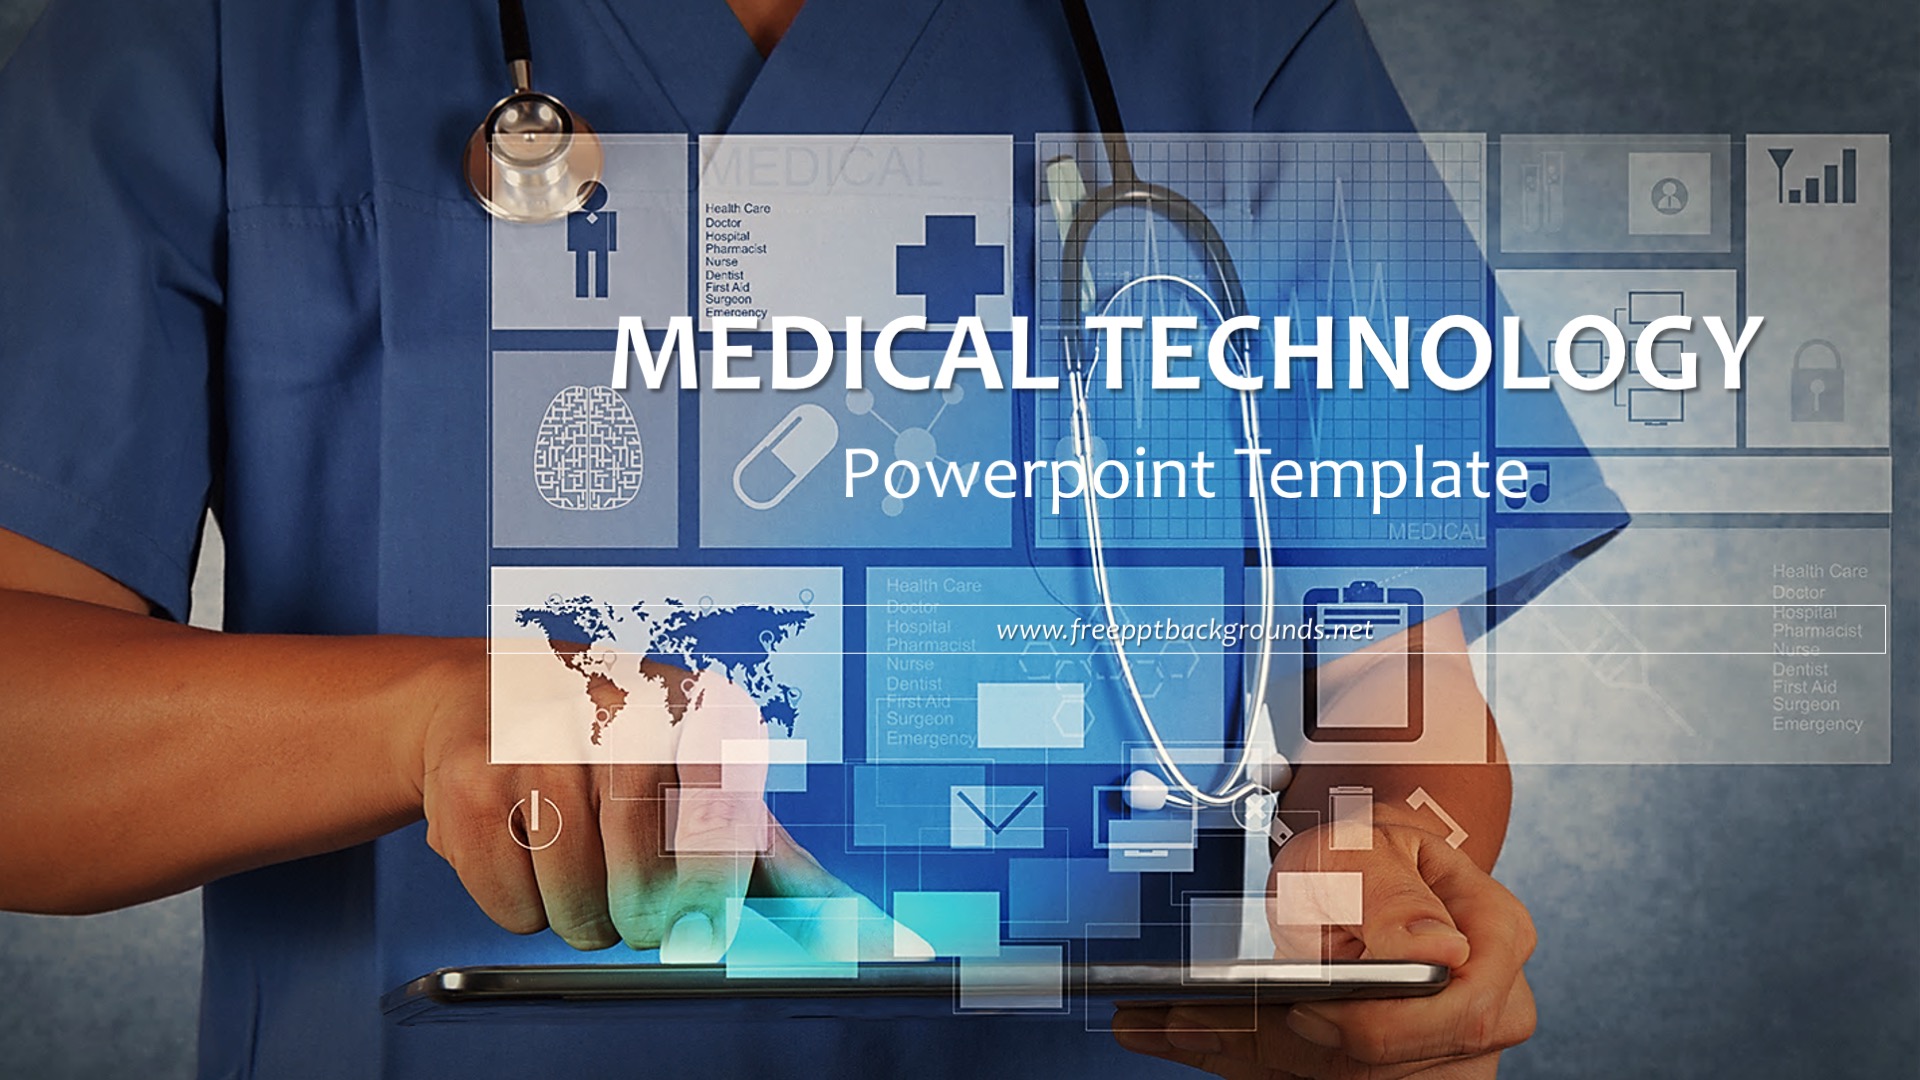 Medical Technology Powerpoint Templates Google Slides, Healthcare